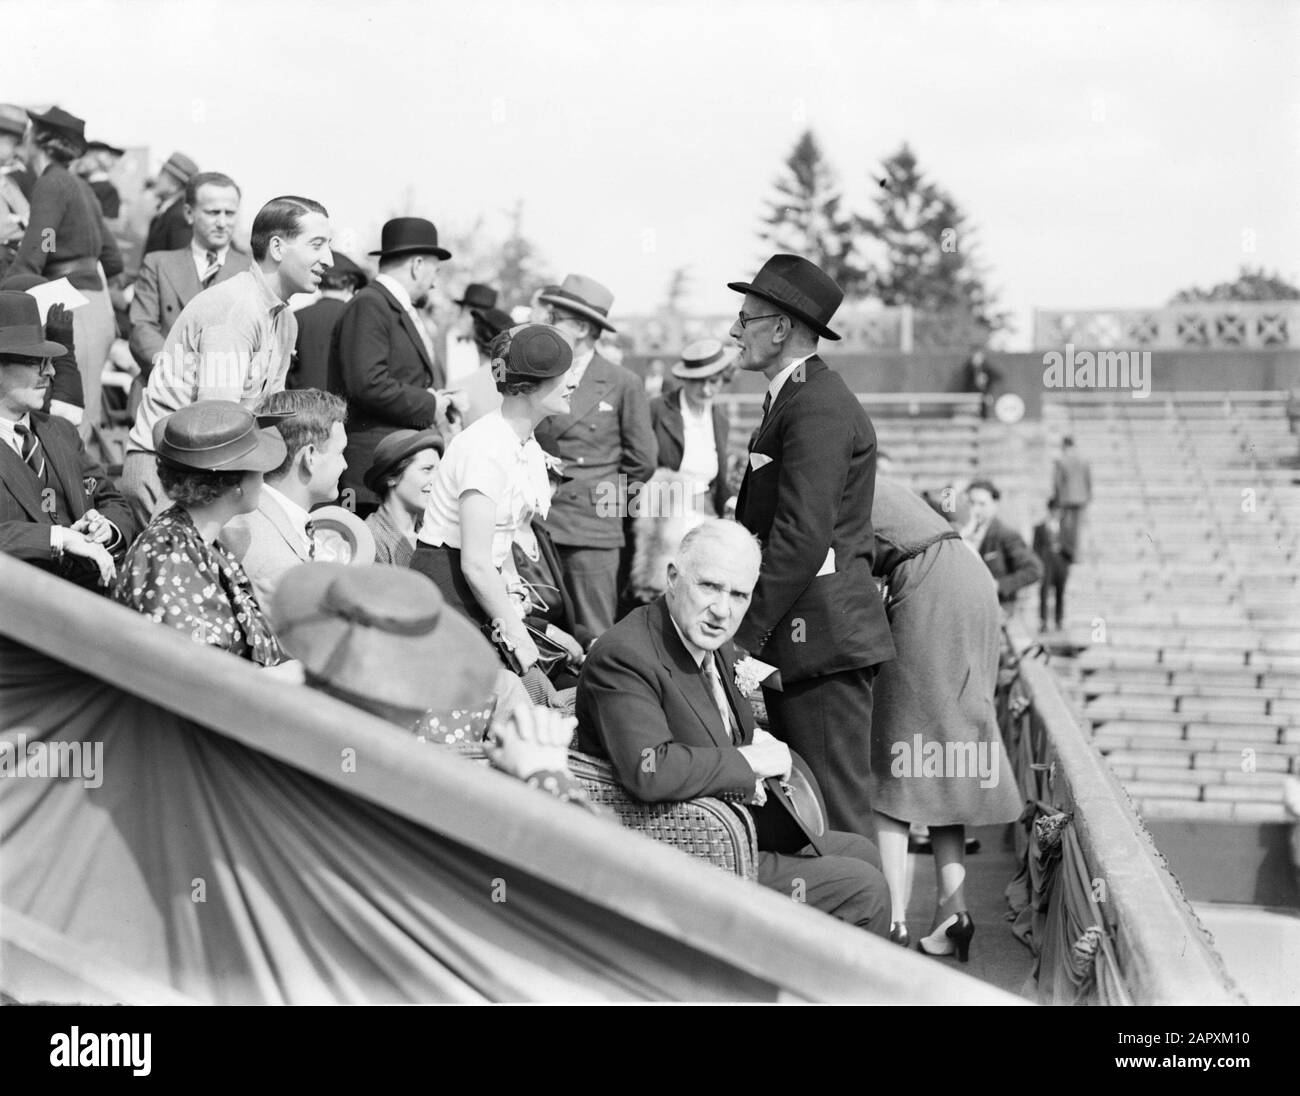 Reportage Paris Tennis match France-England at Roland Garros, English  ambassador (standing in hat) and Mr. and Mme Lacoste (both standing) Date:  May 1936 Location: Paris Keywords: diplomats, tennis, matches Personal  name: Lacoste,